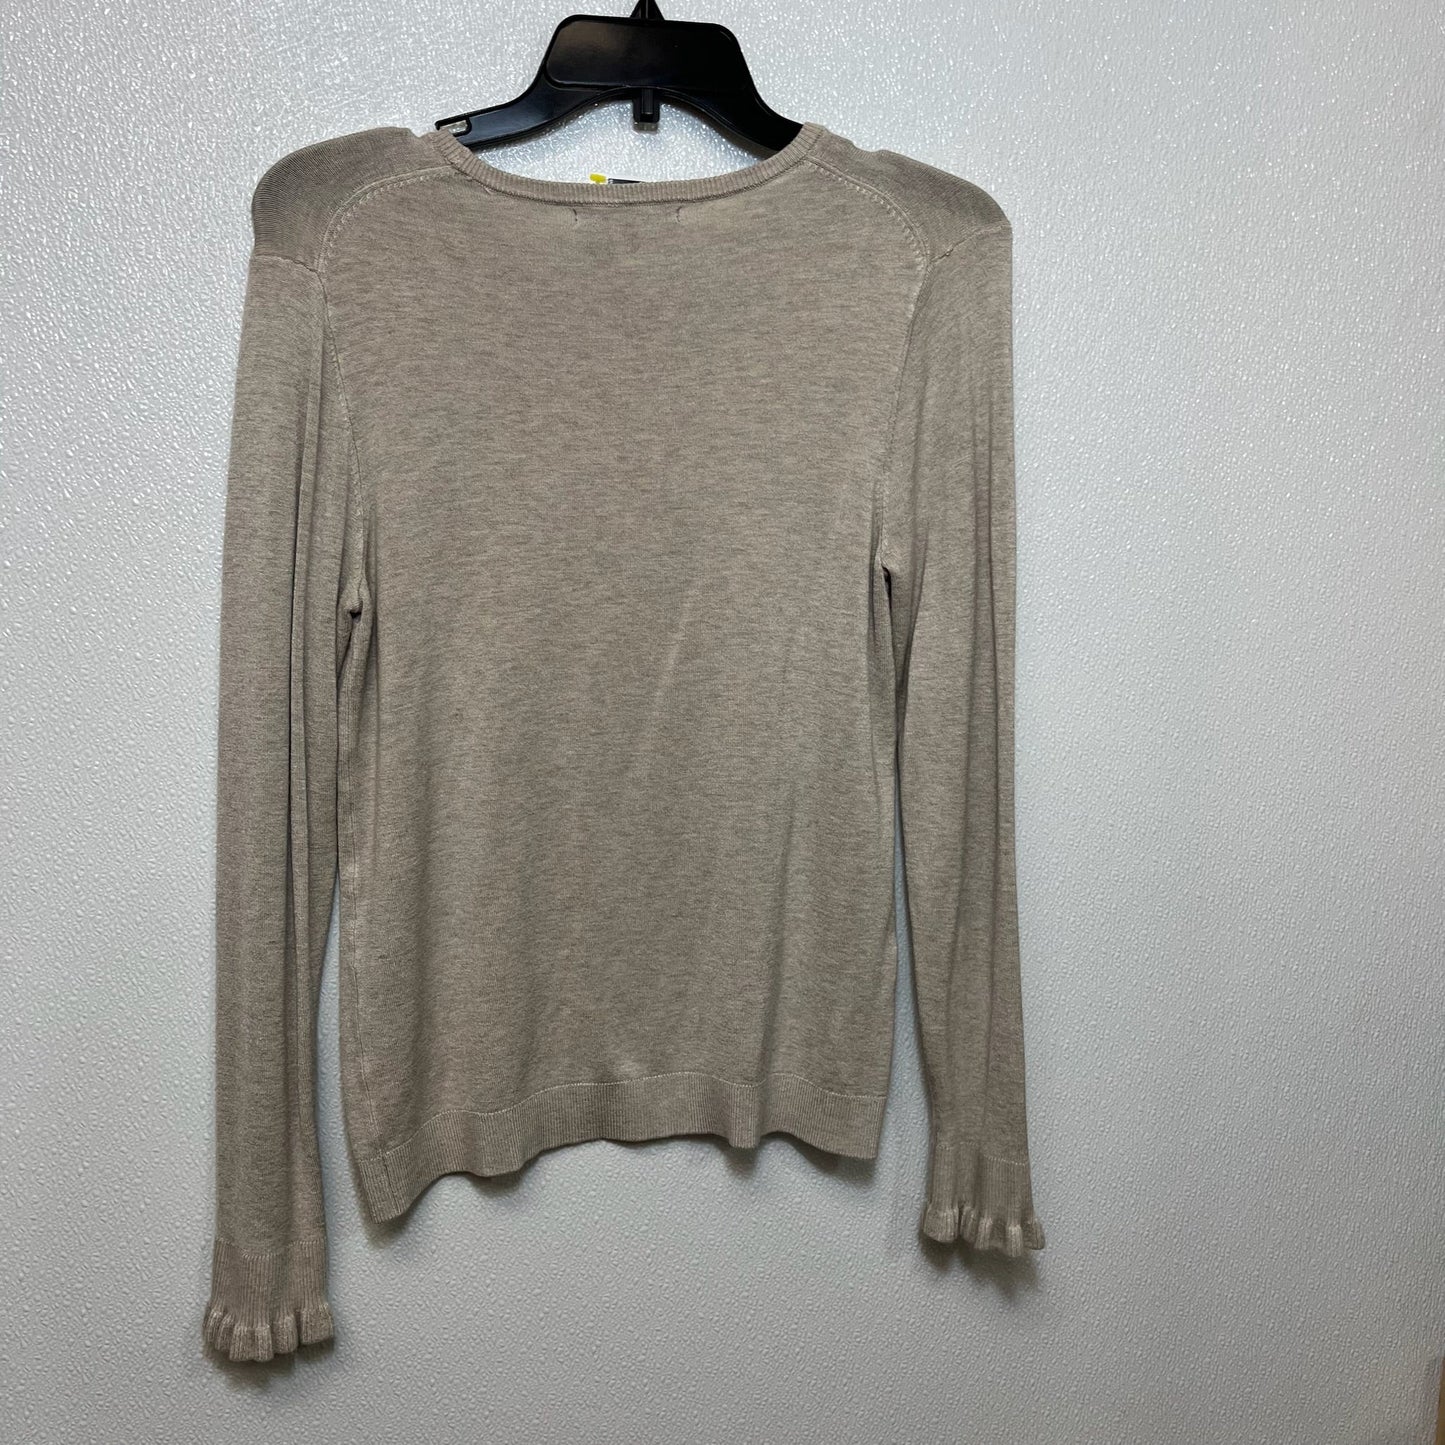 Sweater By Mng  Size: L